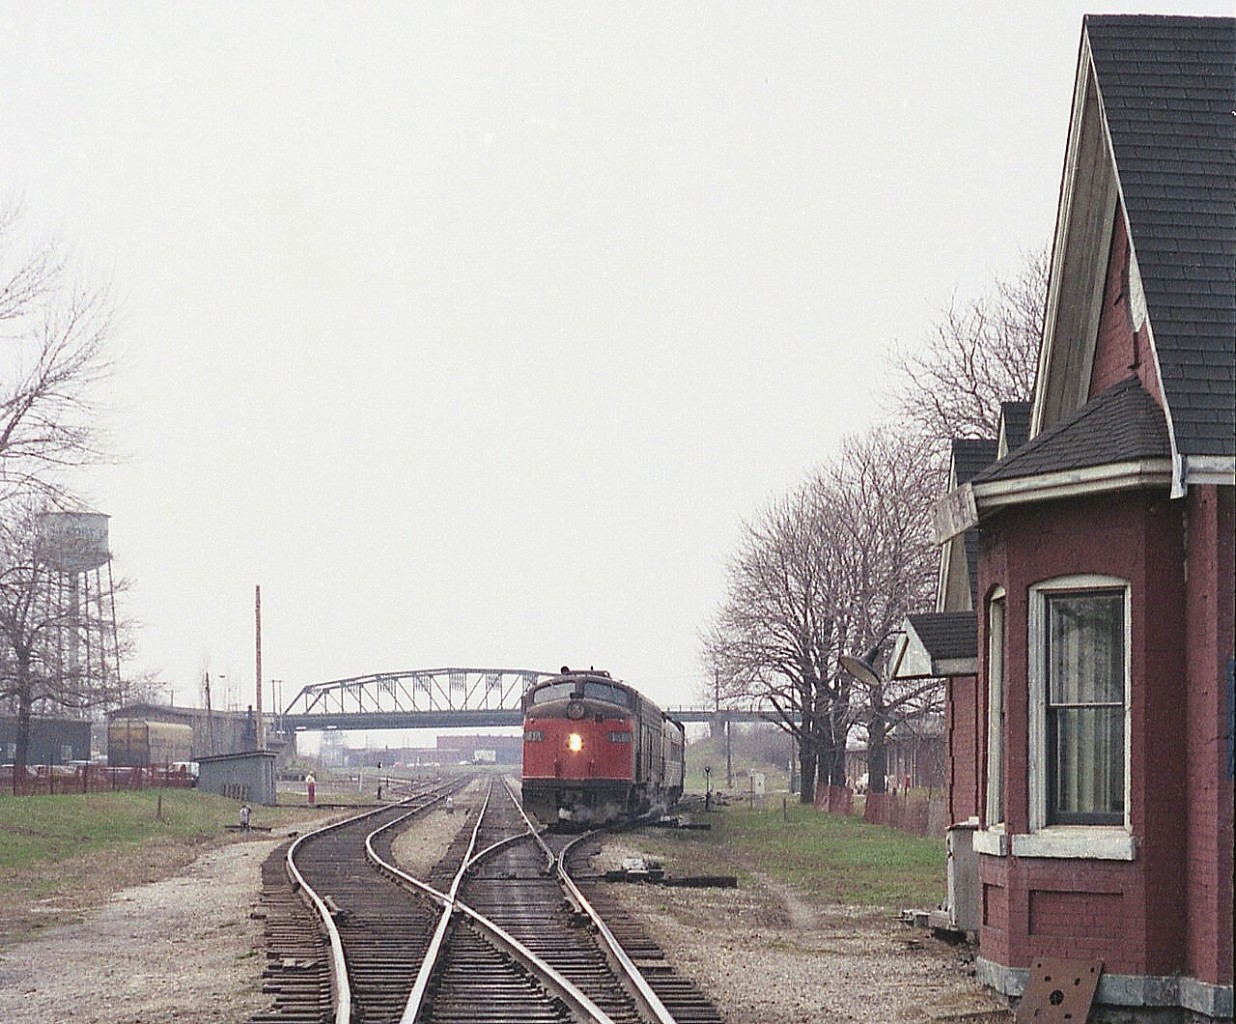 These were the lean years for Amtrak. This train which rattled its way along the CASO from Detroit thru to the International Bridge to Buffalo was given the name "Niagara Rainbow" a rather inventive name for such a clunker.
This train during these lean years ran with old hand-me-down E8A units, as seen in this image. AMTK 407 is photographed on approach to the bridge having just stopped at the passenger station. A few people and a taxi can be seen. On the right in this image is the old B-1 station, moved in 1981 to Oakes Park down on Central Av to keep the old CNR 6218 company. A lot of things have changed in Fort Erie over the years...on the left, the water tower is gone, as is the crew hostel in front. The bridge recently was replaced. In far background the CN shop has been closed and is now a fledgling RR museum. And the Sidekick of the day was along; standing in front of the pole on the left.